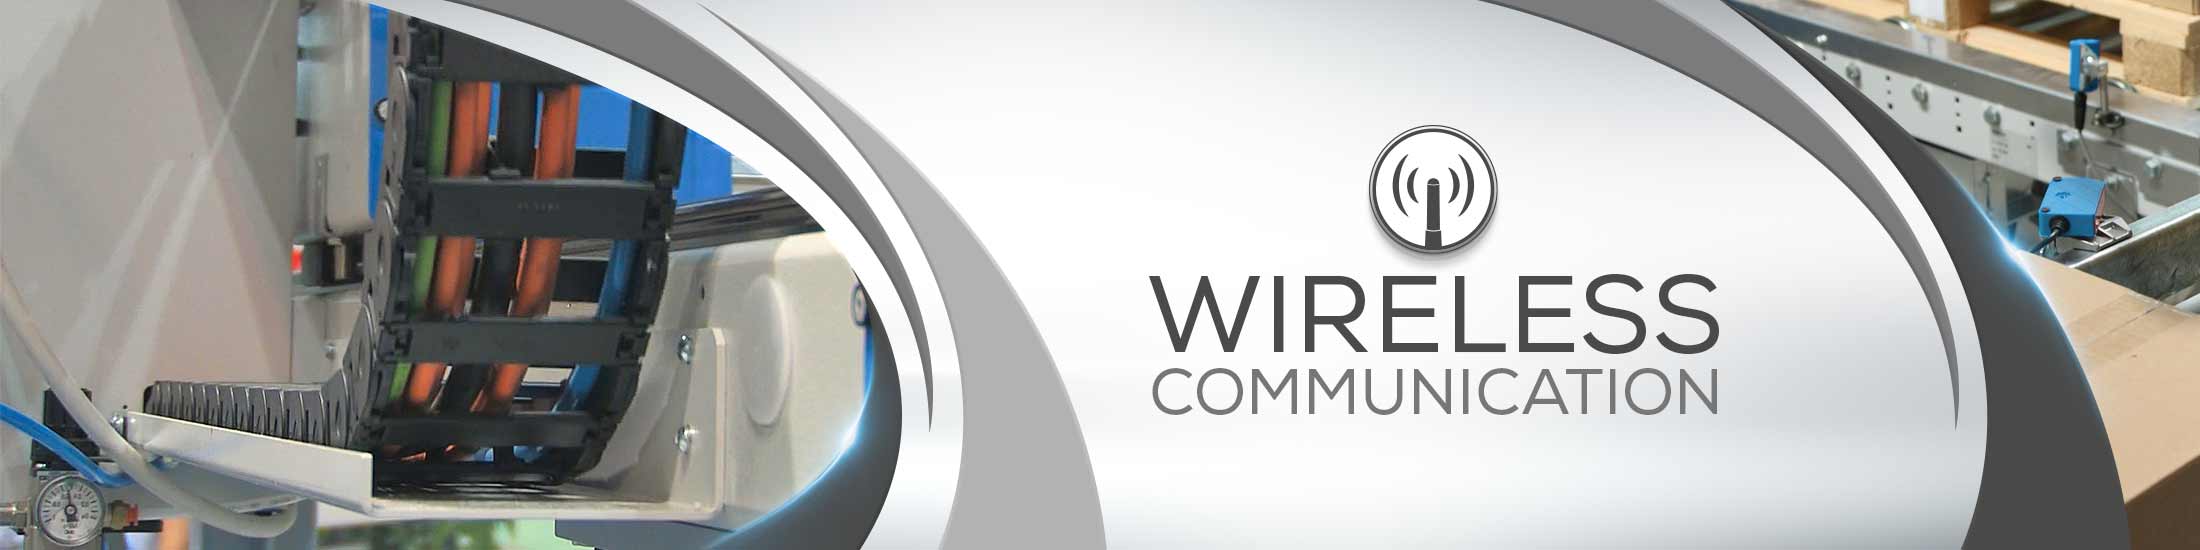 Banner Wireless communication - wireless connection of mobile & decentralized components in machines and plants